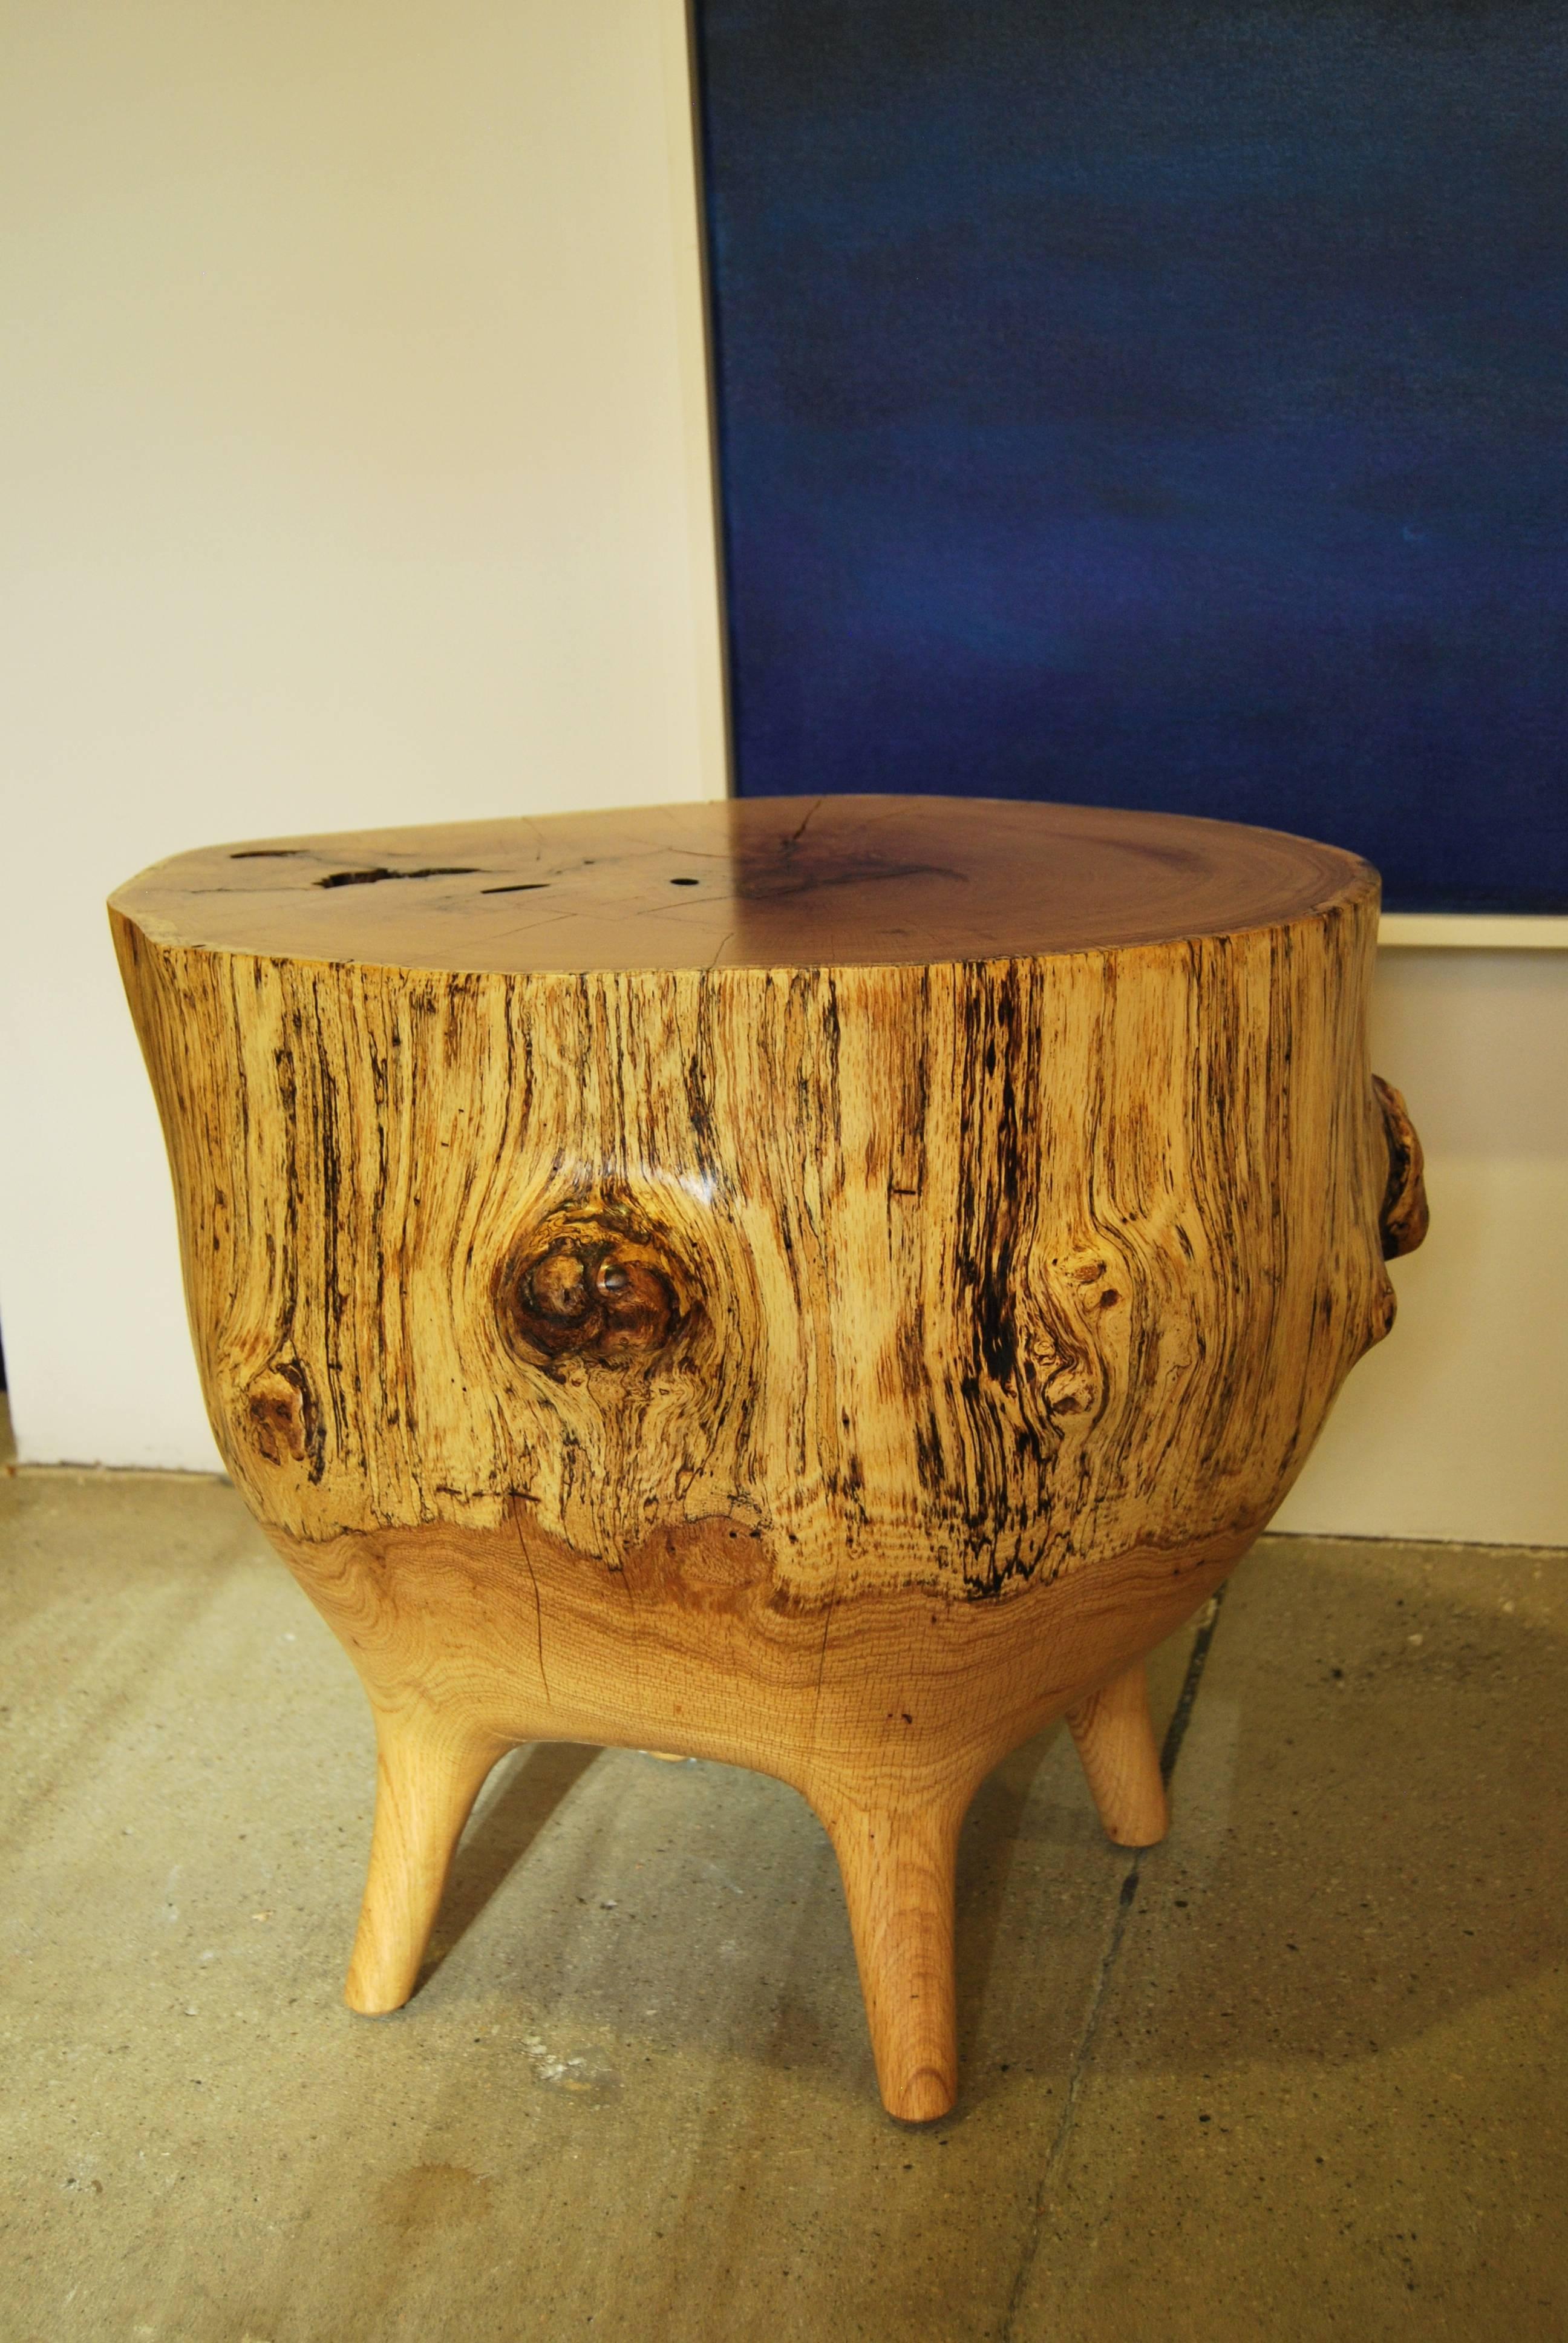 Hand-sculpted, organic side table with beautiful 